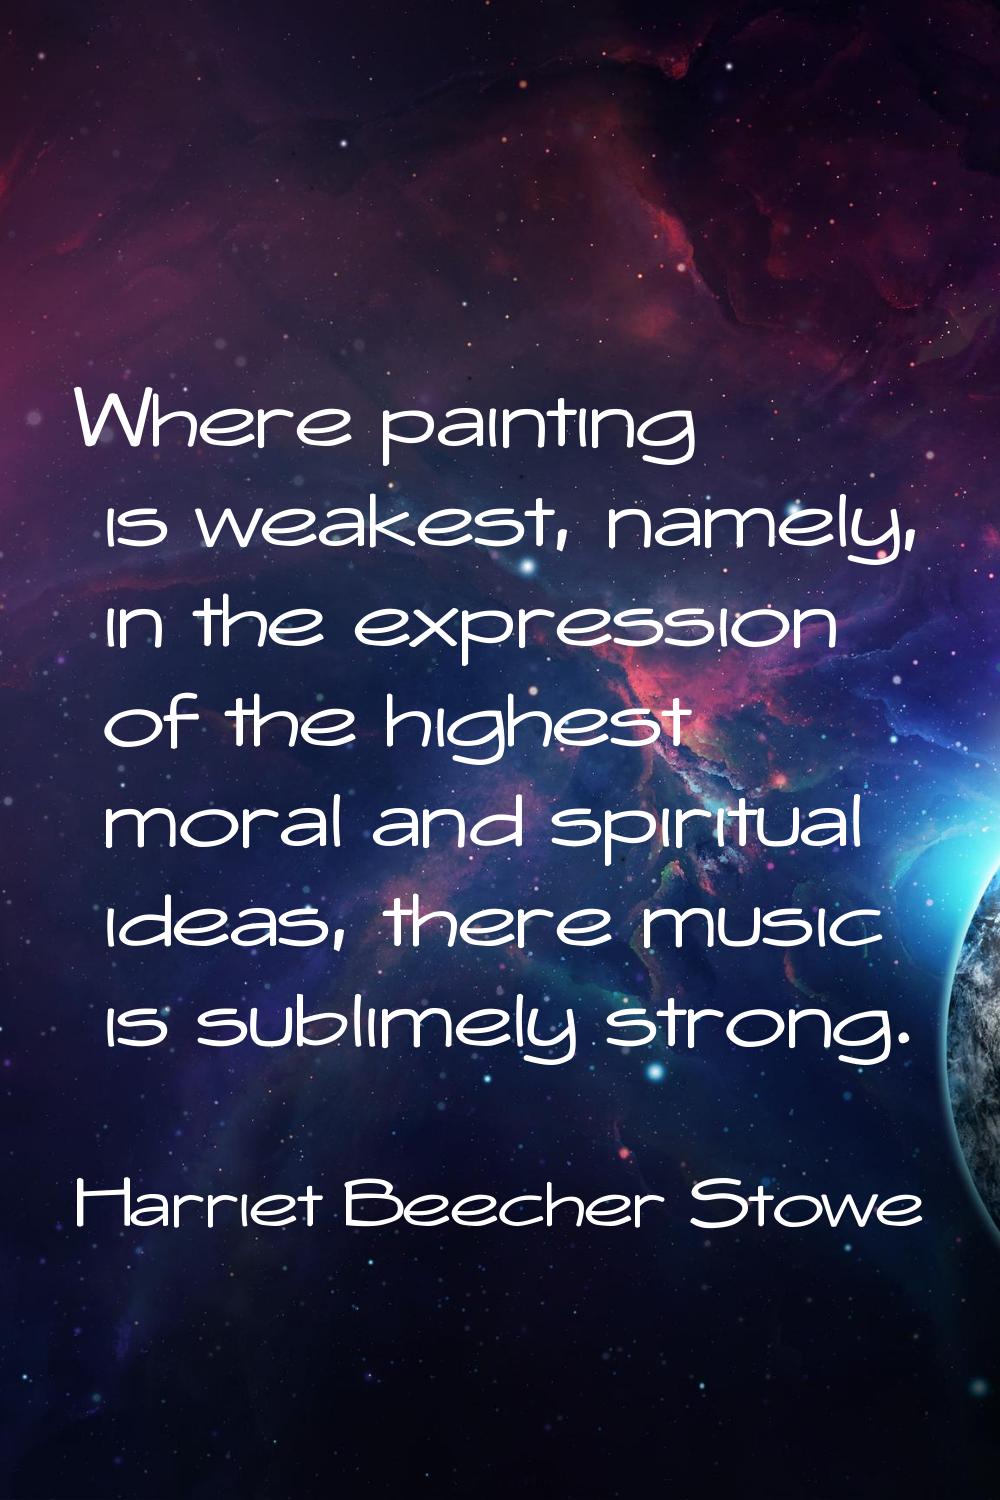 Where painting is weakest, namely, in the expression of the highest moral and spiritual ideas, ther